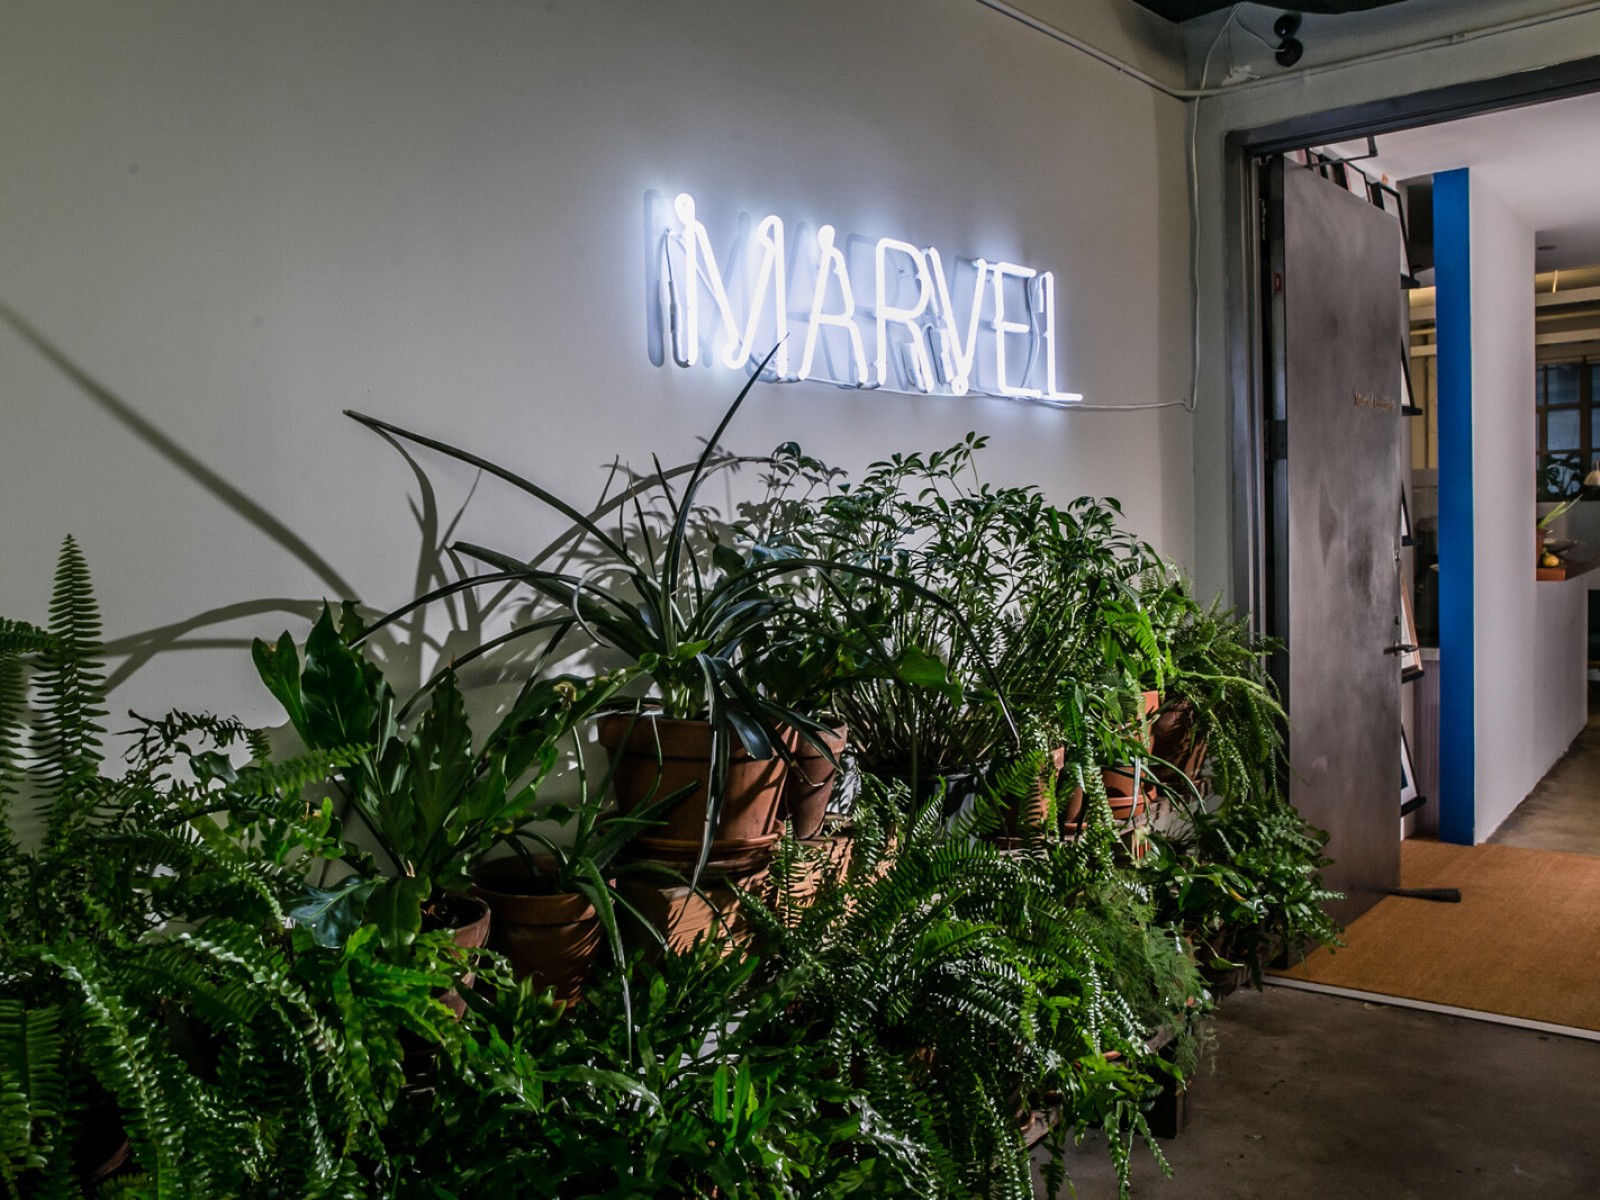 Marvel is a solutions-driven design practice, Marvel integrates context and nature into every project. Marvel meets each design challenge by listening to its surroundings.